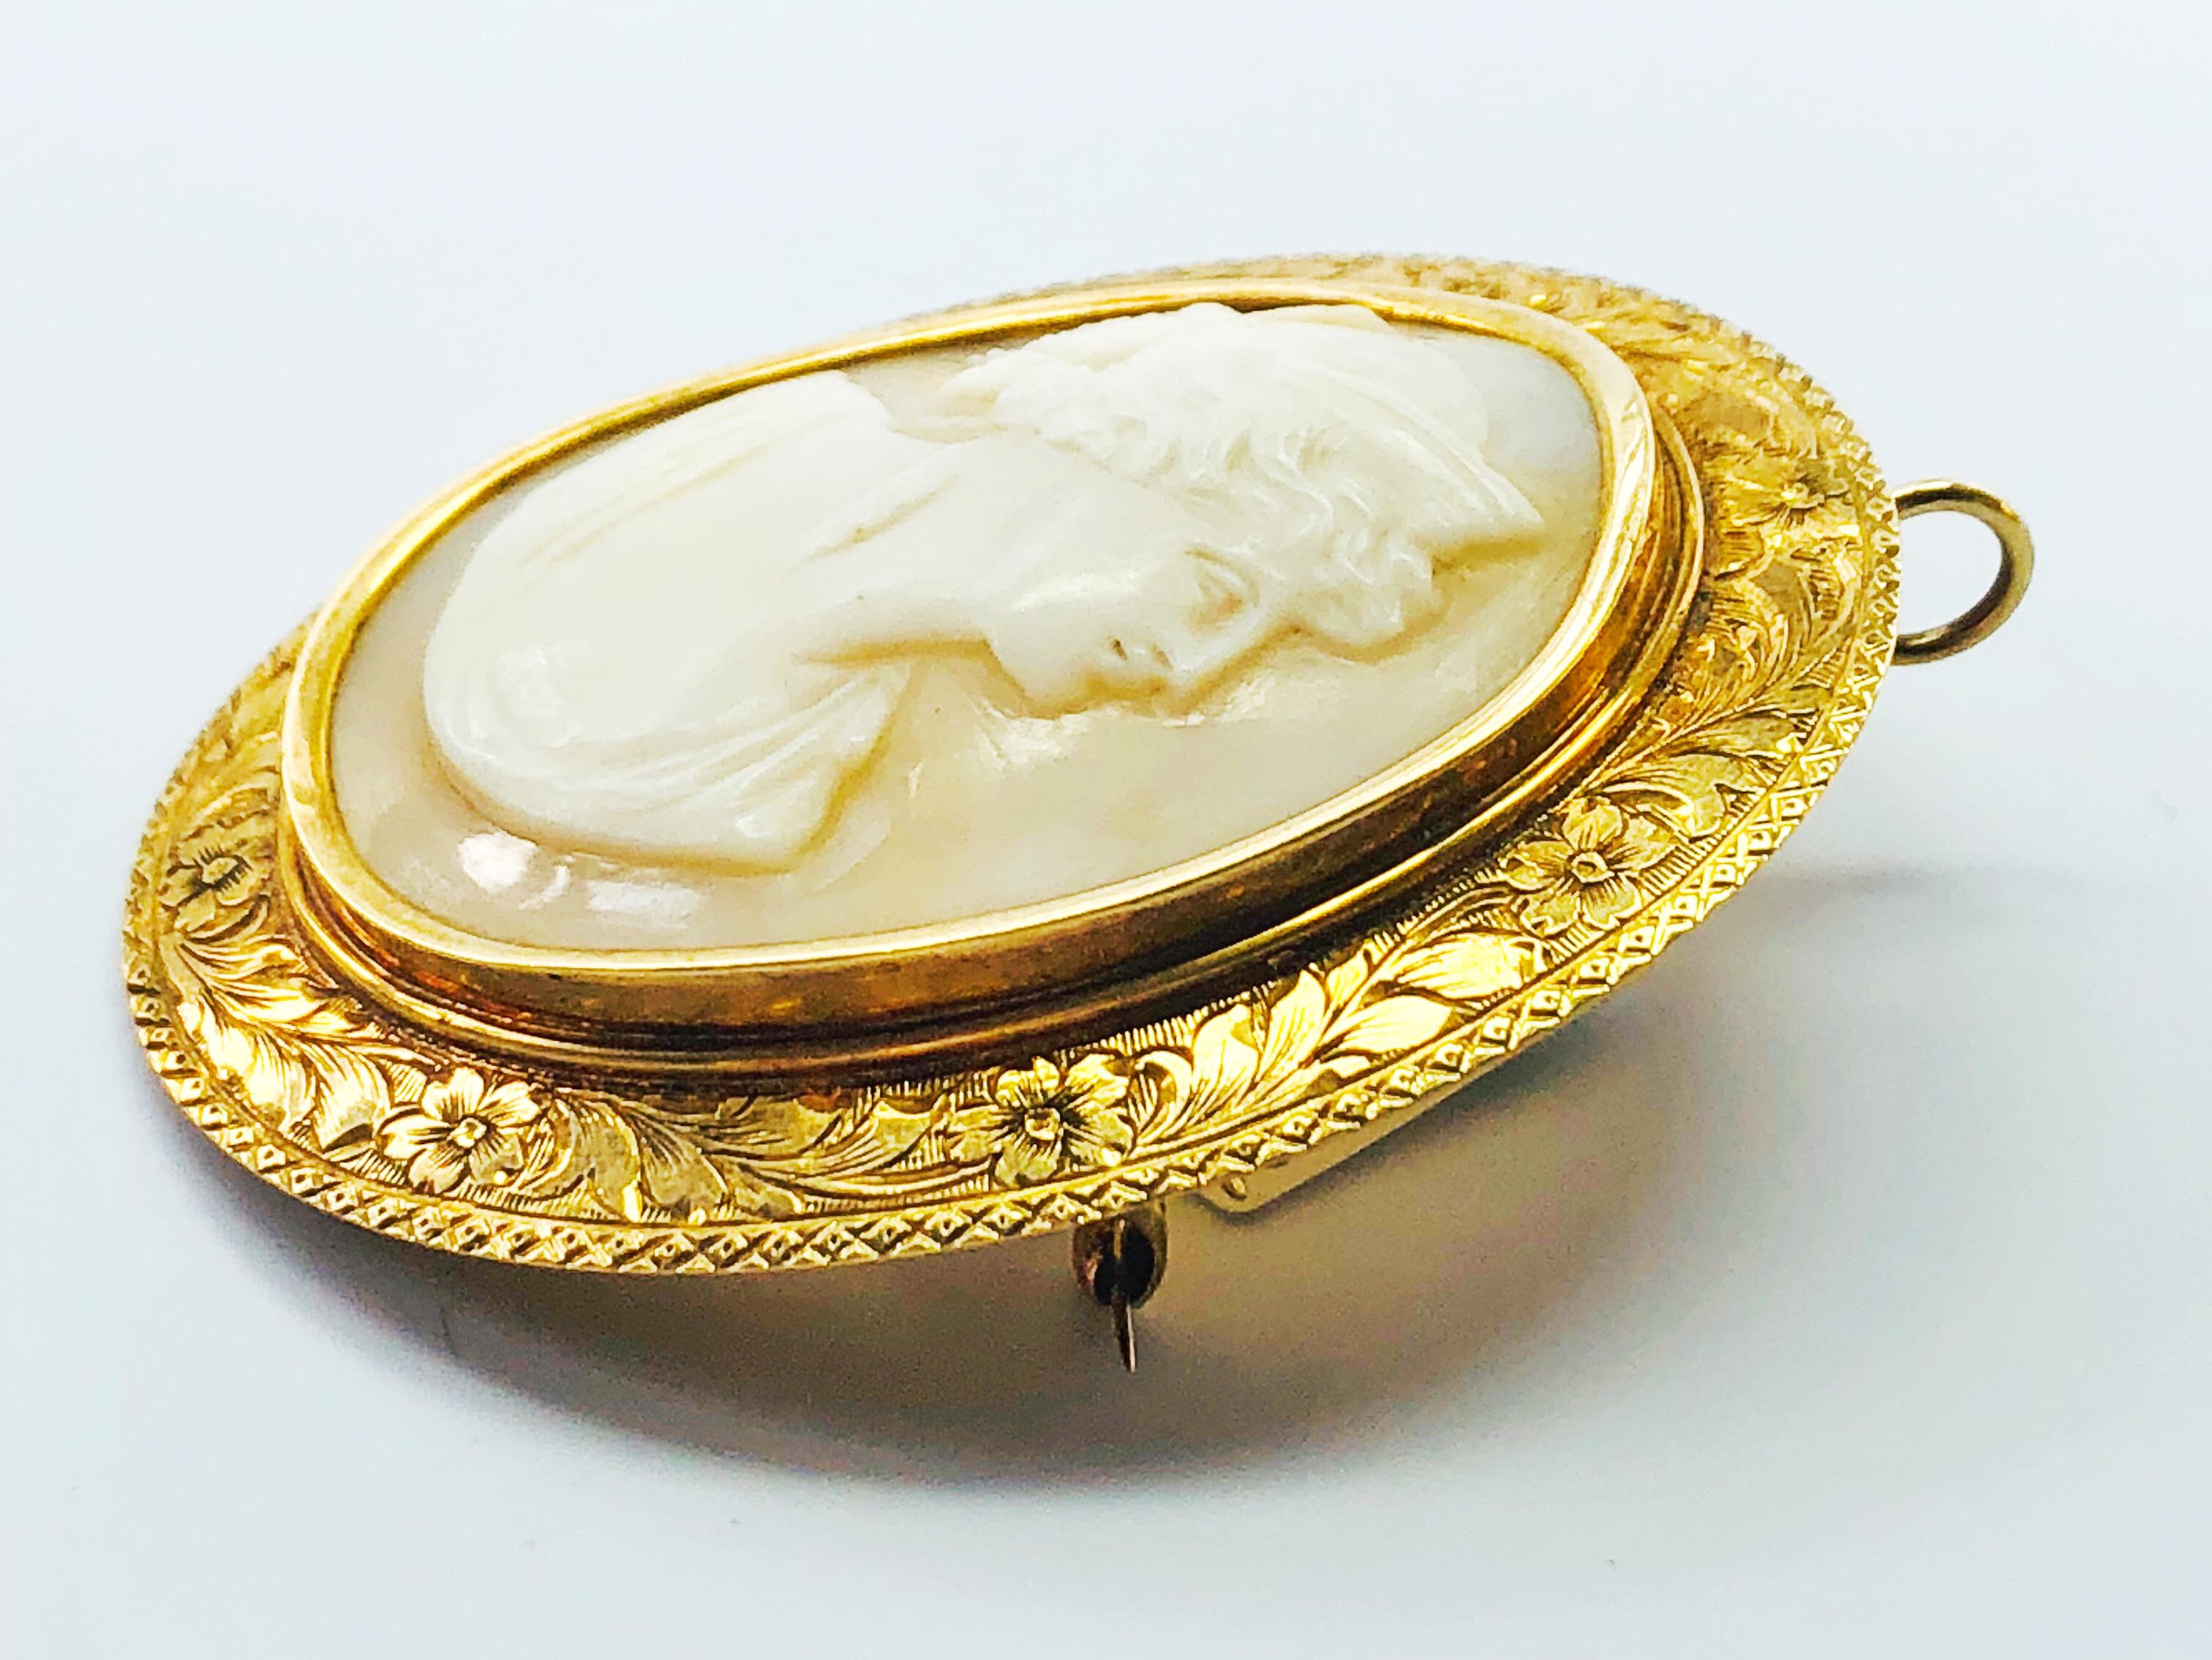 This is a Rare, Victorian, Hand carved, estate, 14K yellow Gold and Shell Cameo. This cameo is in an oval shape and can be worn as a pendant or a brooch and has a stunning engraved yellow gold bezel! The measurements listed below do NOT include the